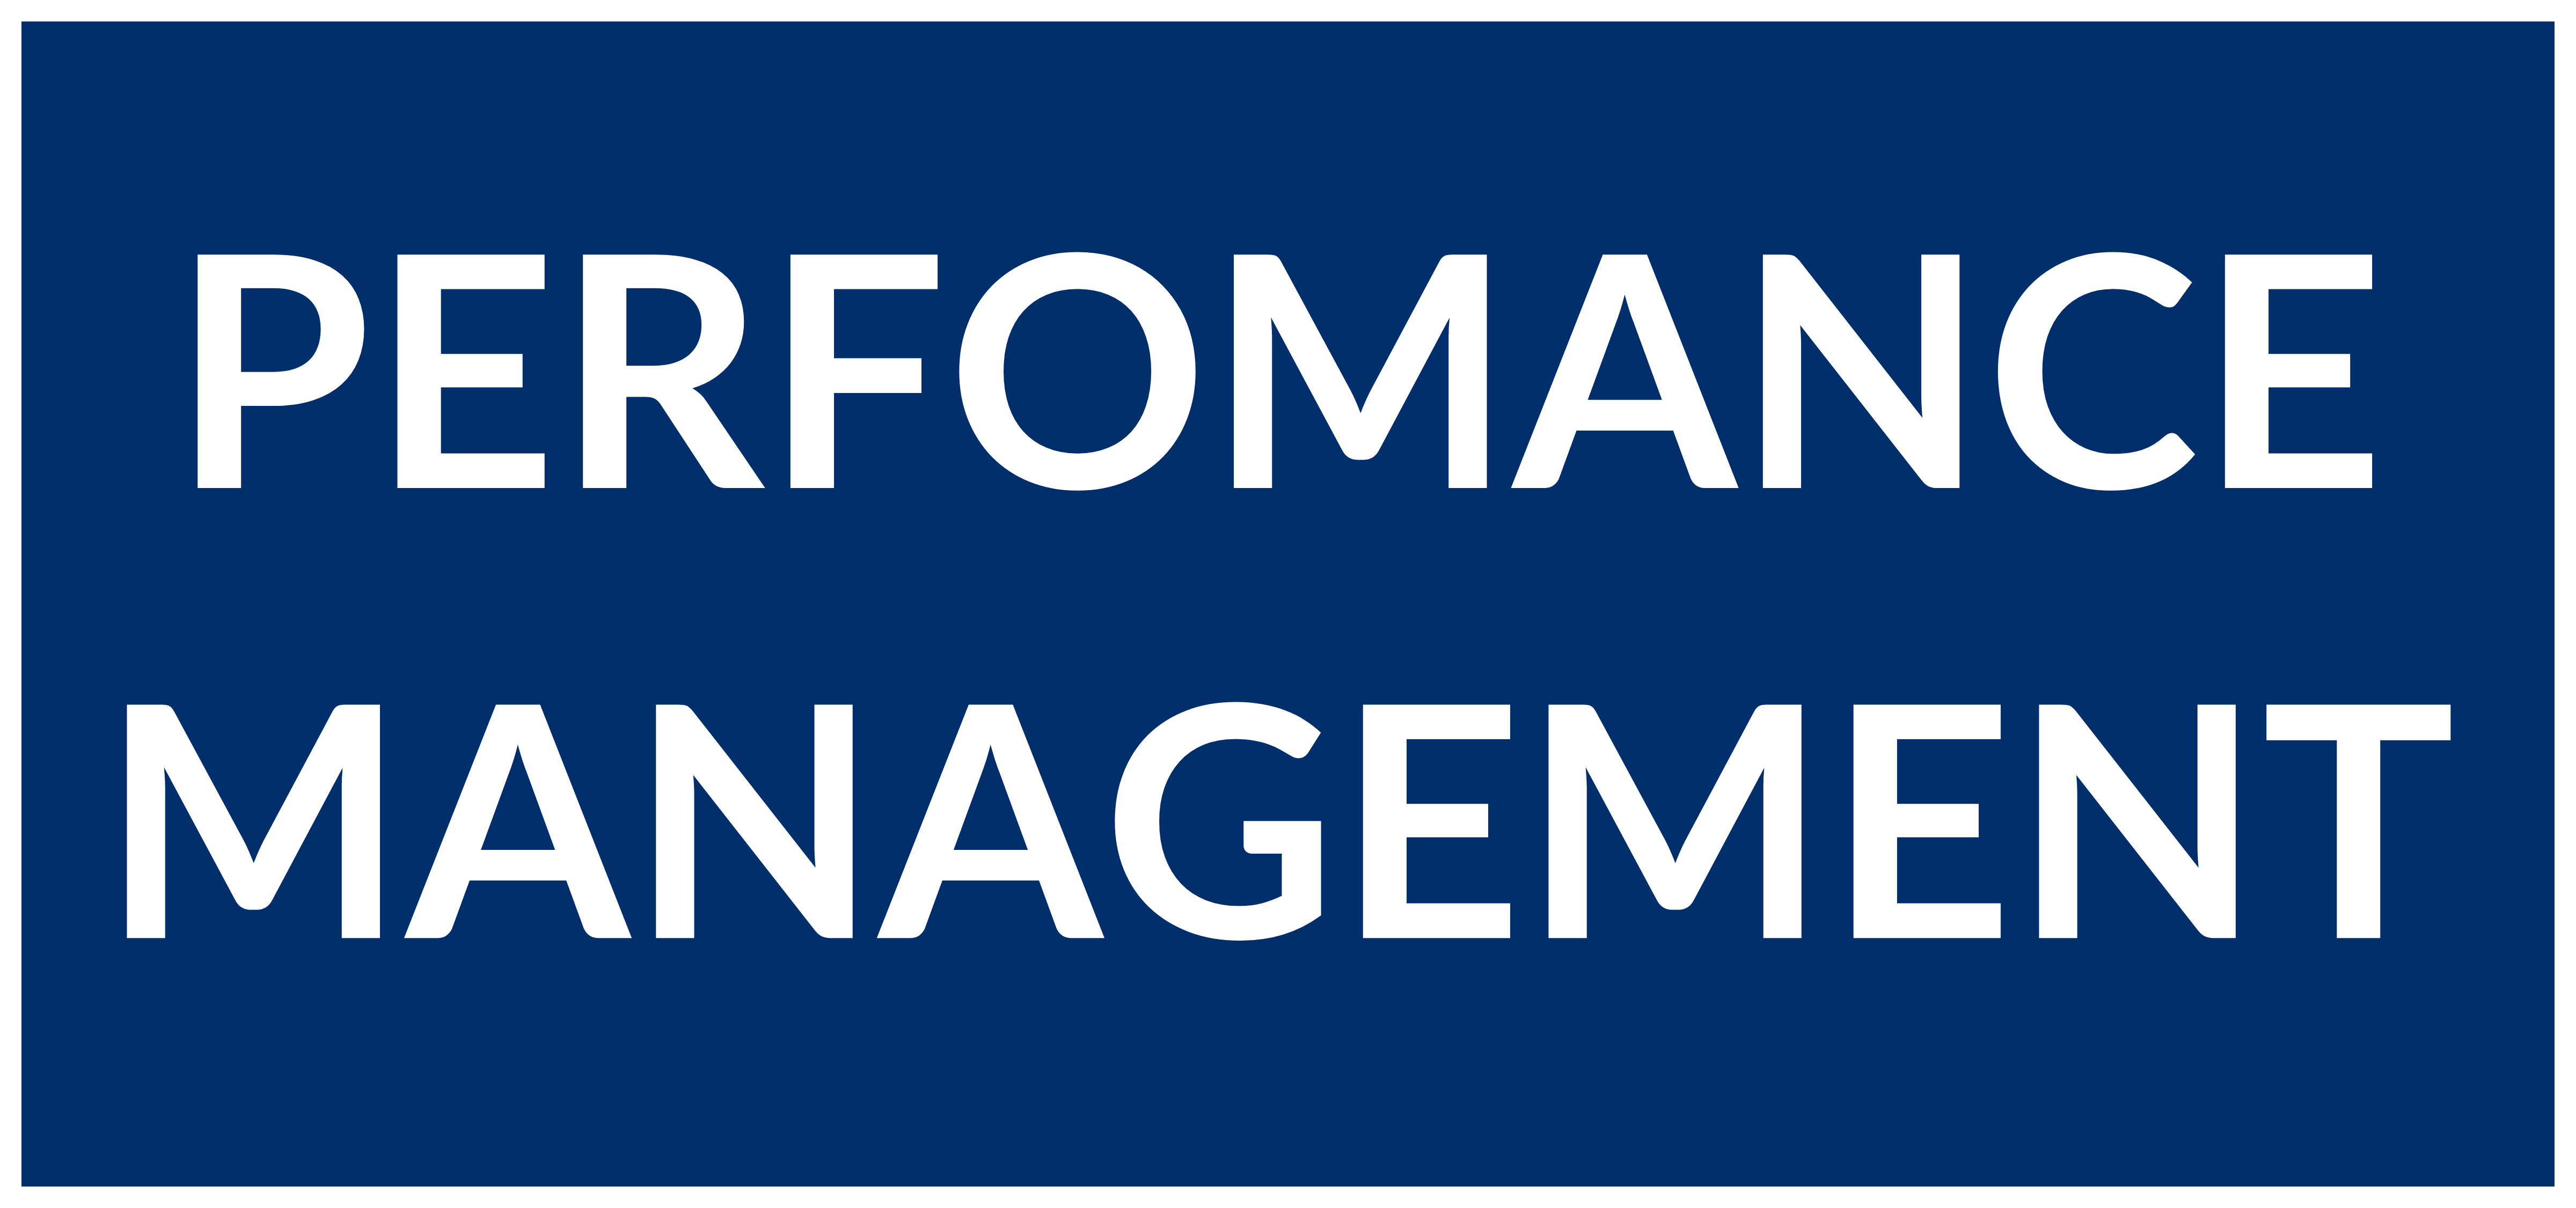 The Science of Performance Management